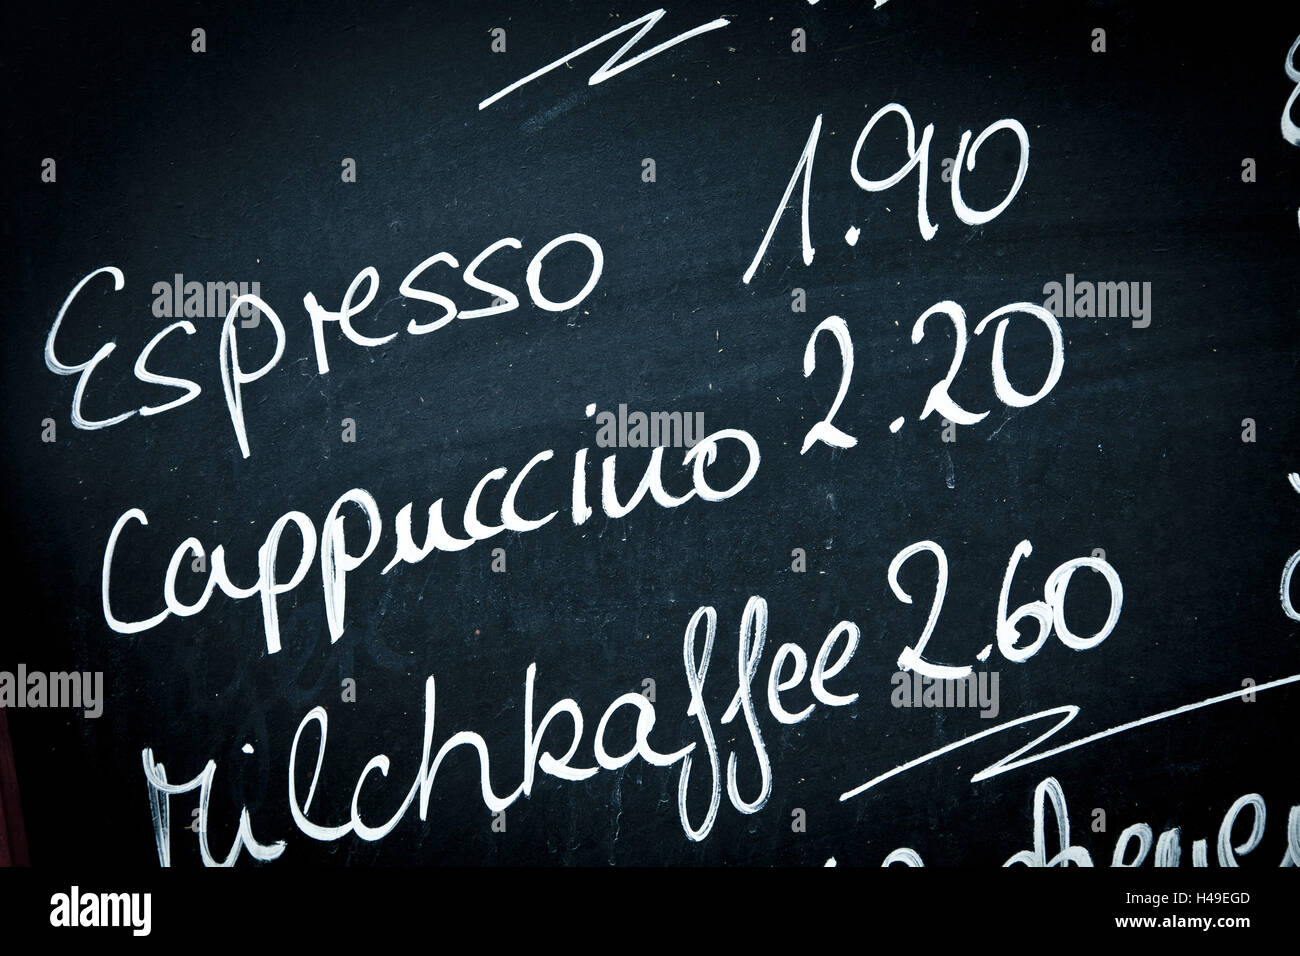 Cafe, notice board, prices, medium close-up, detail, Stock Photo